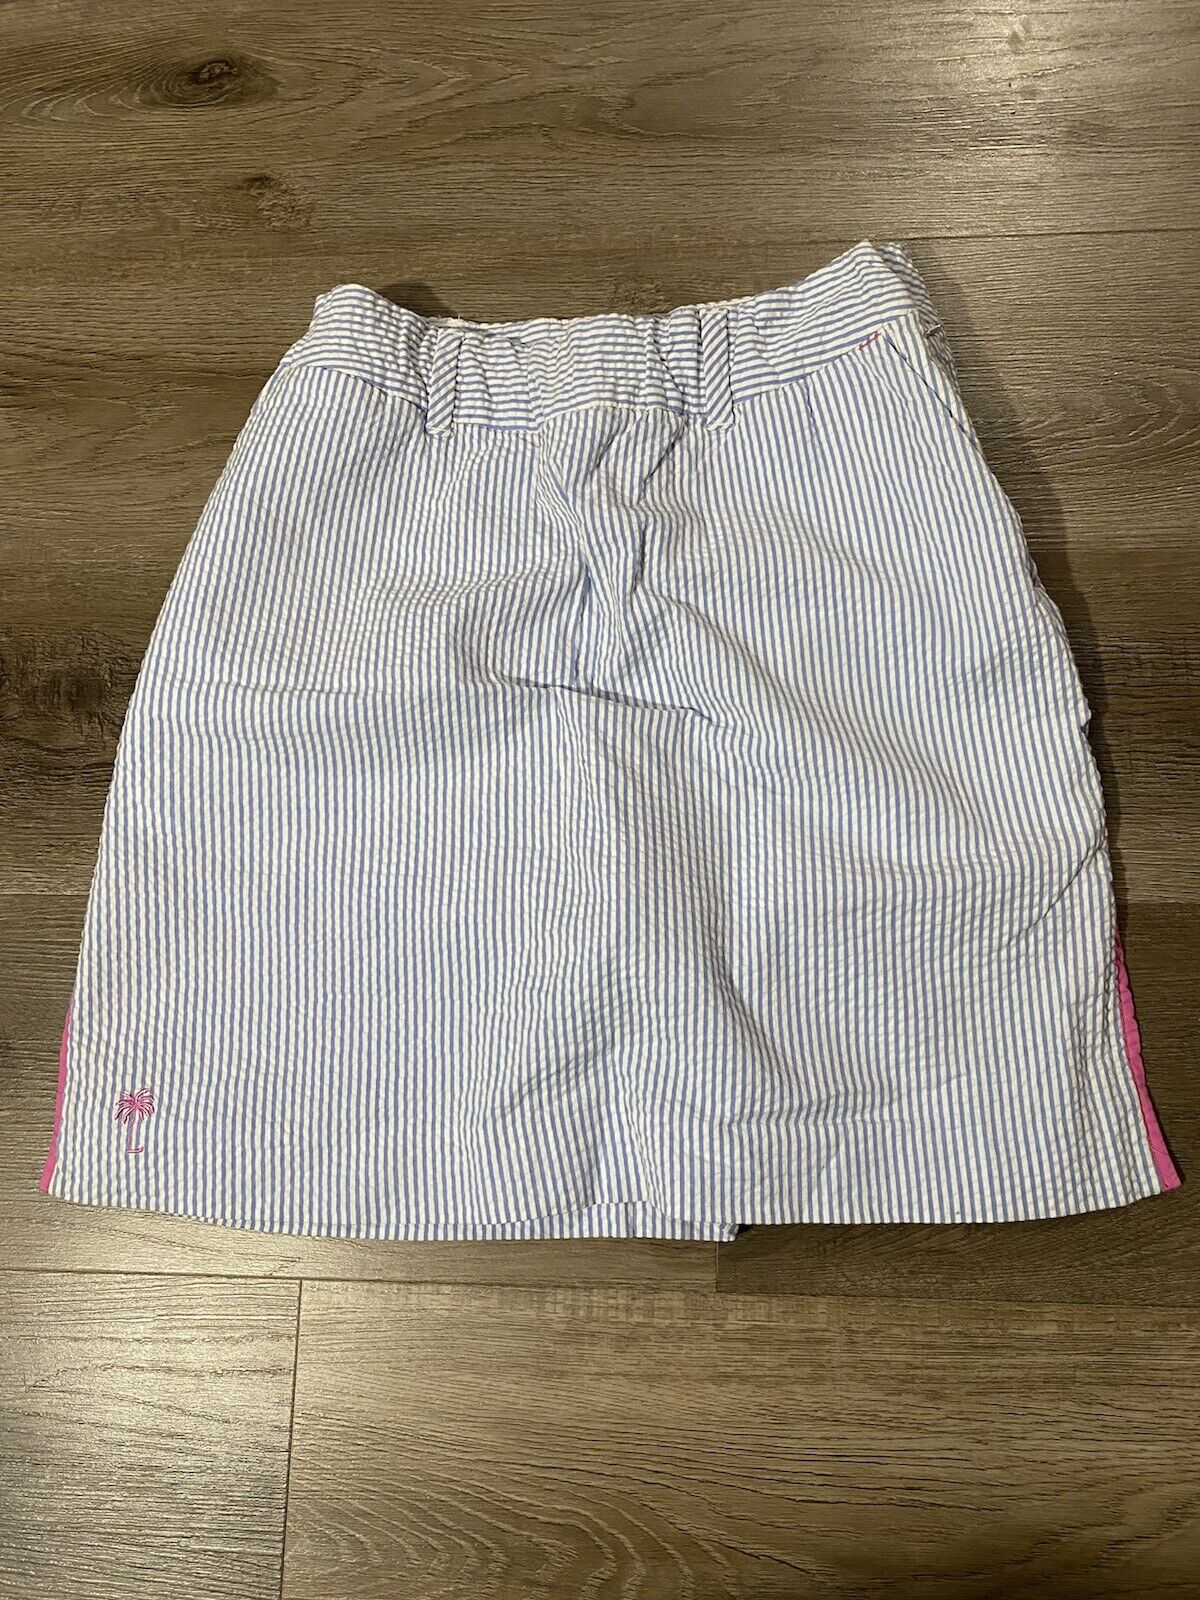 Lilly Pulitzer Baby Blue White Striped Skirt Shor… - image 1